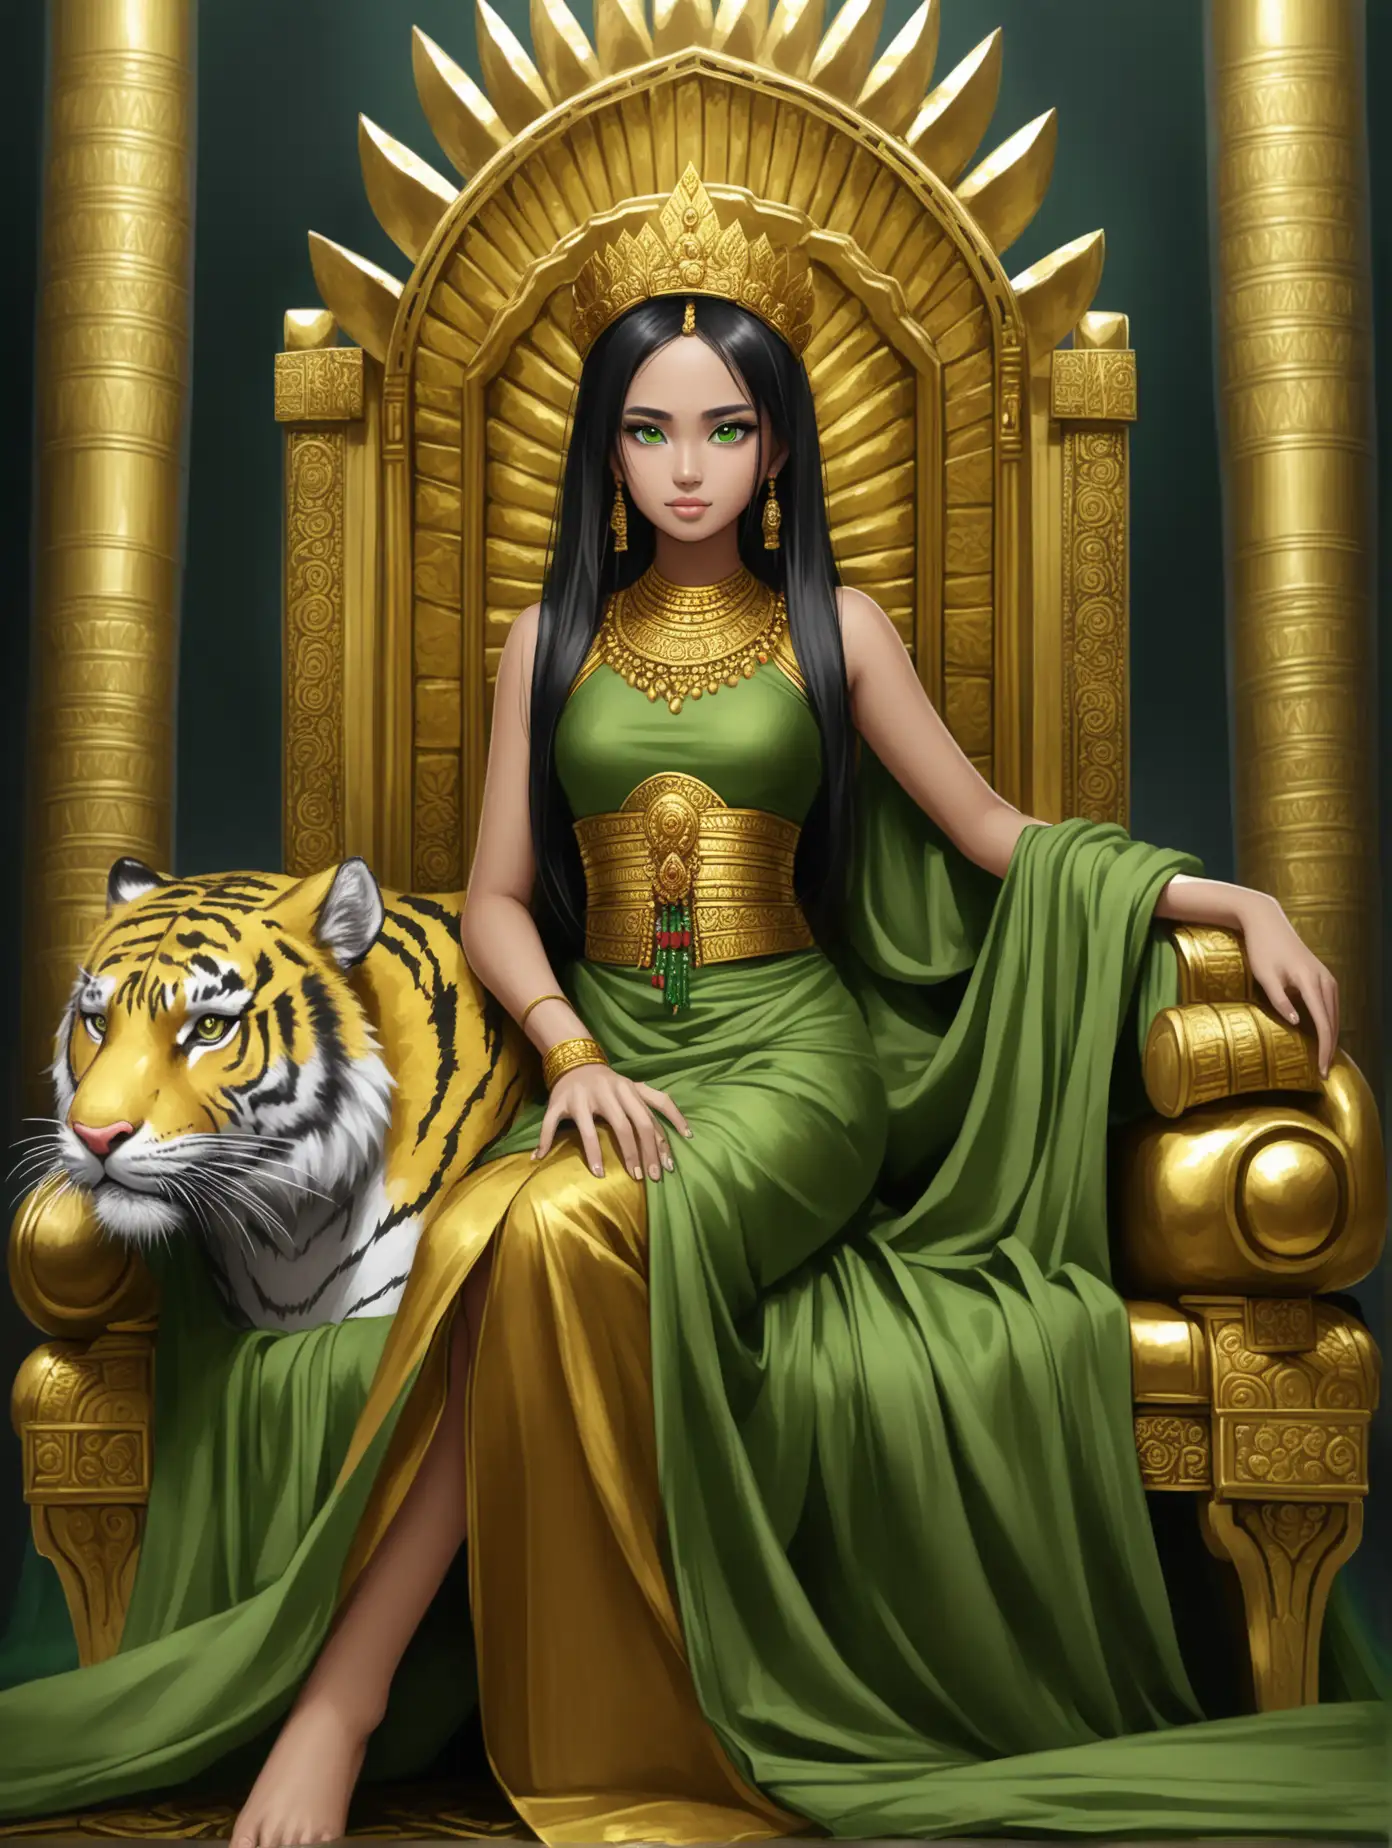 Elegant-25YearOld-Woman-on-Golden-Throne-with-Tiger-Companion